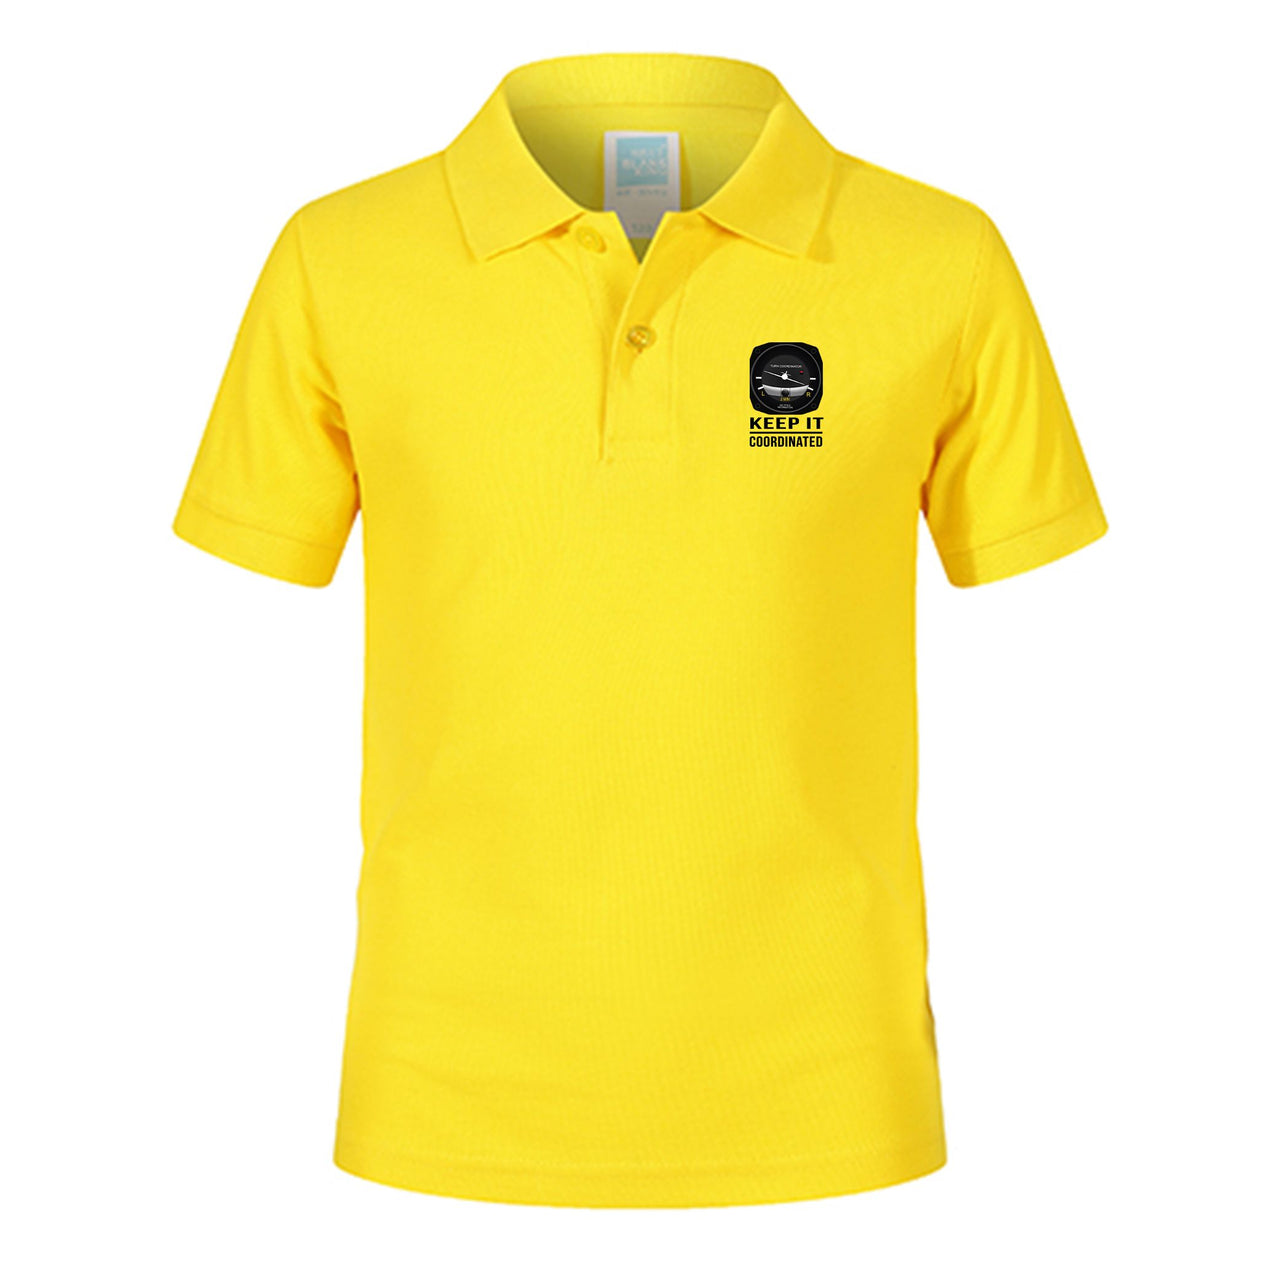 Keep It Coordinated Designed Children Polo T-Shirts